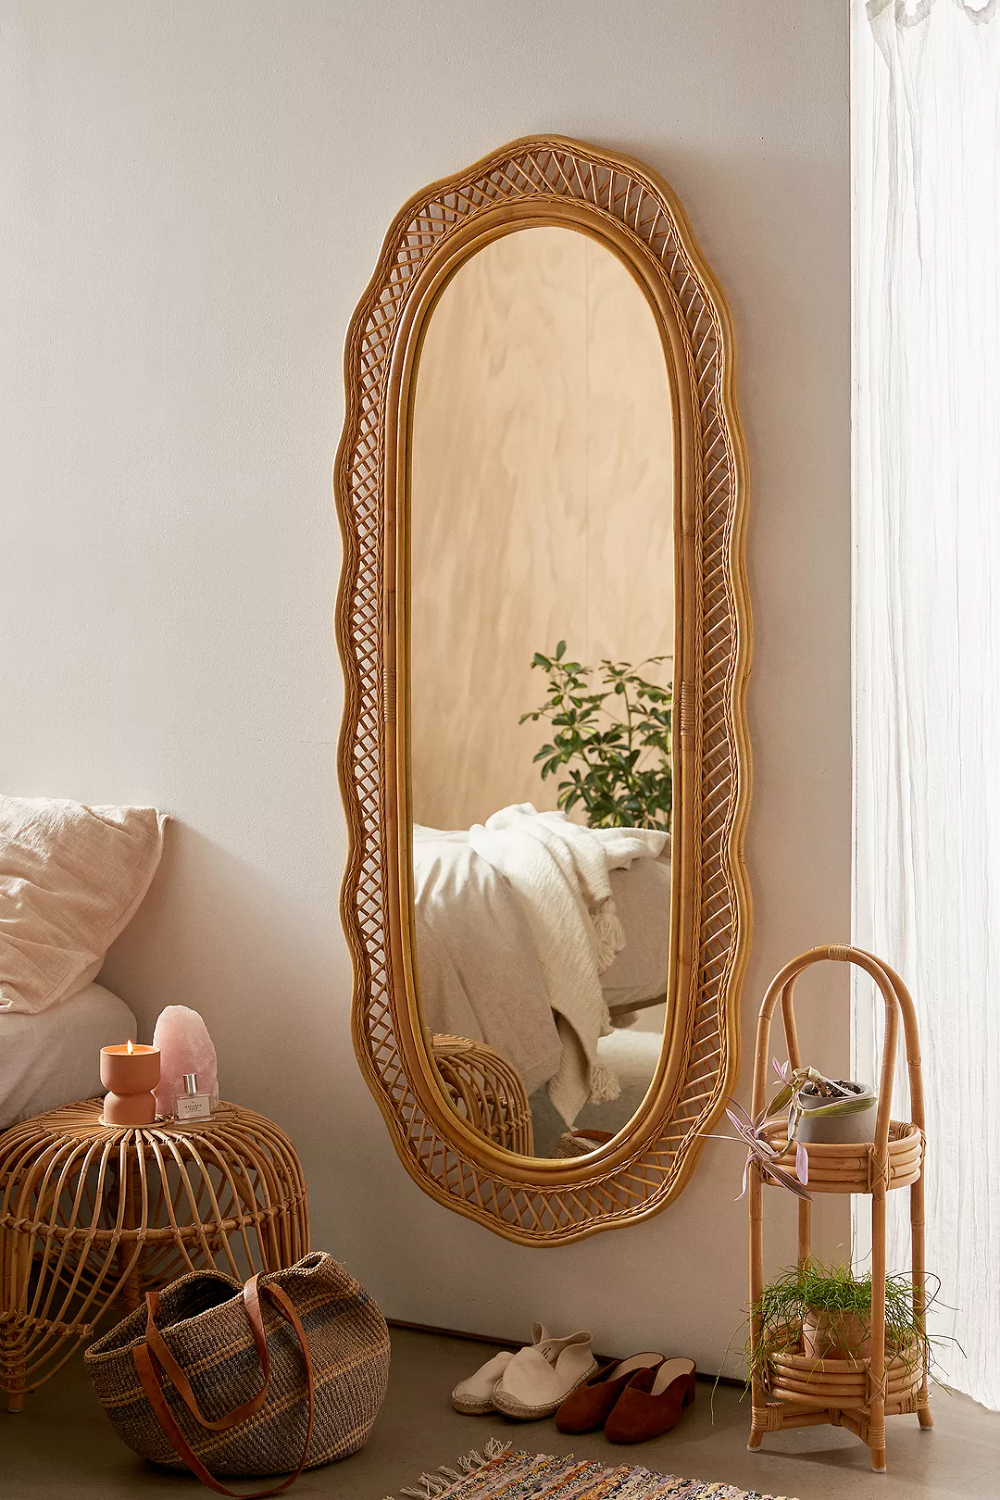 Stunning Wall Mirror Designs to Reflect Your Style